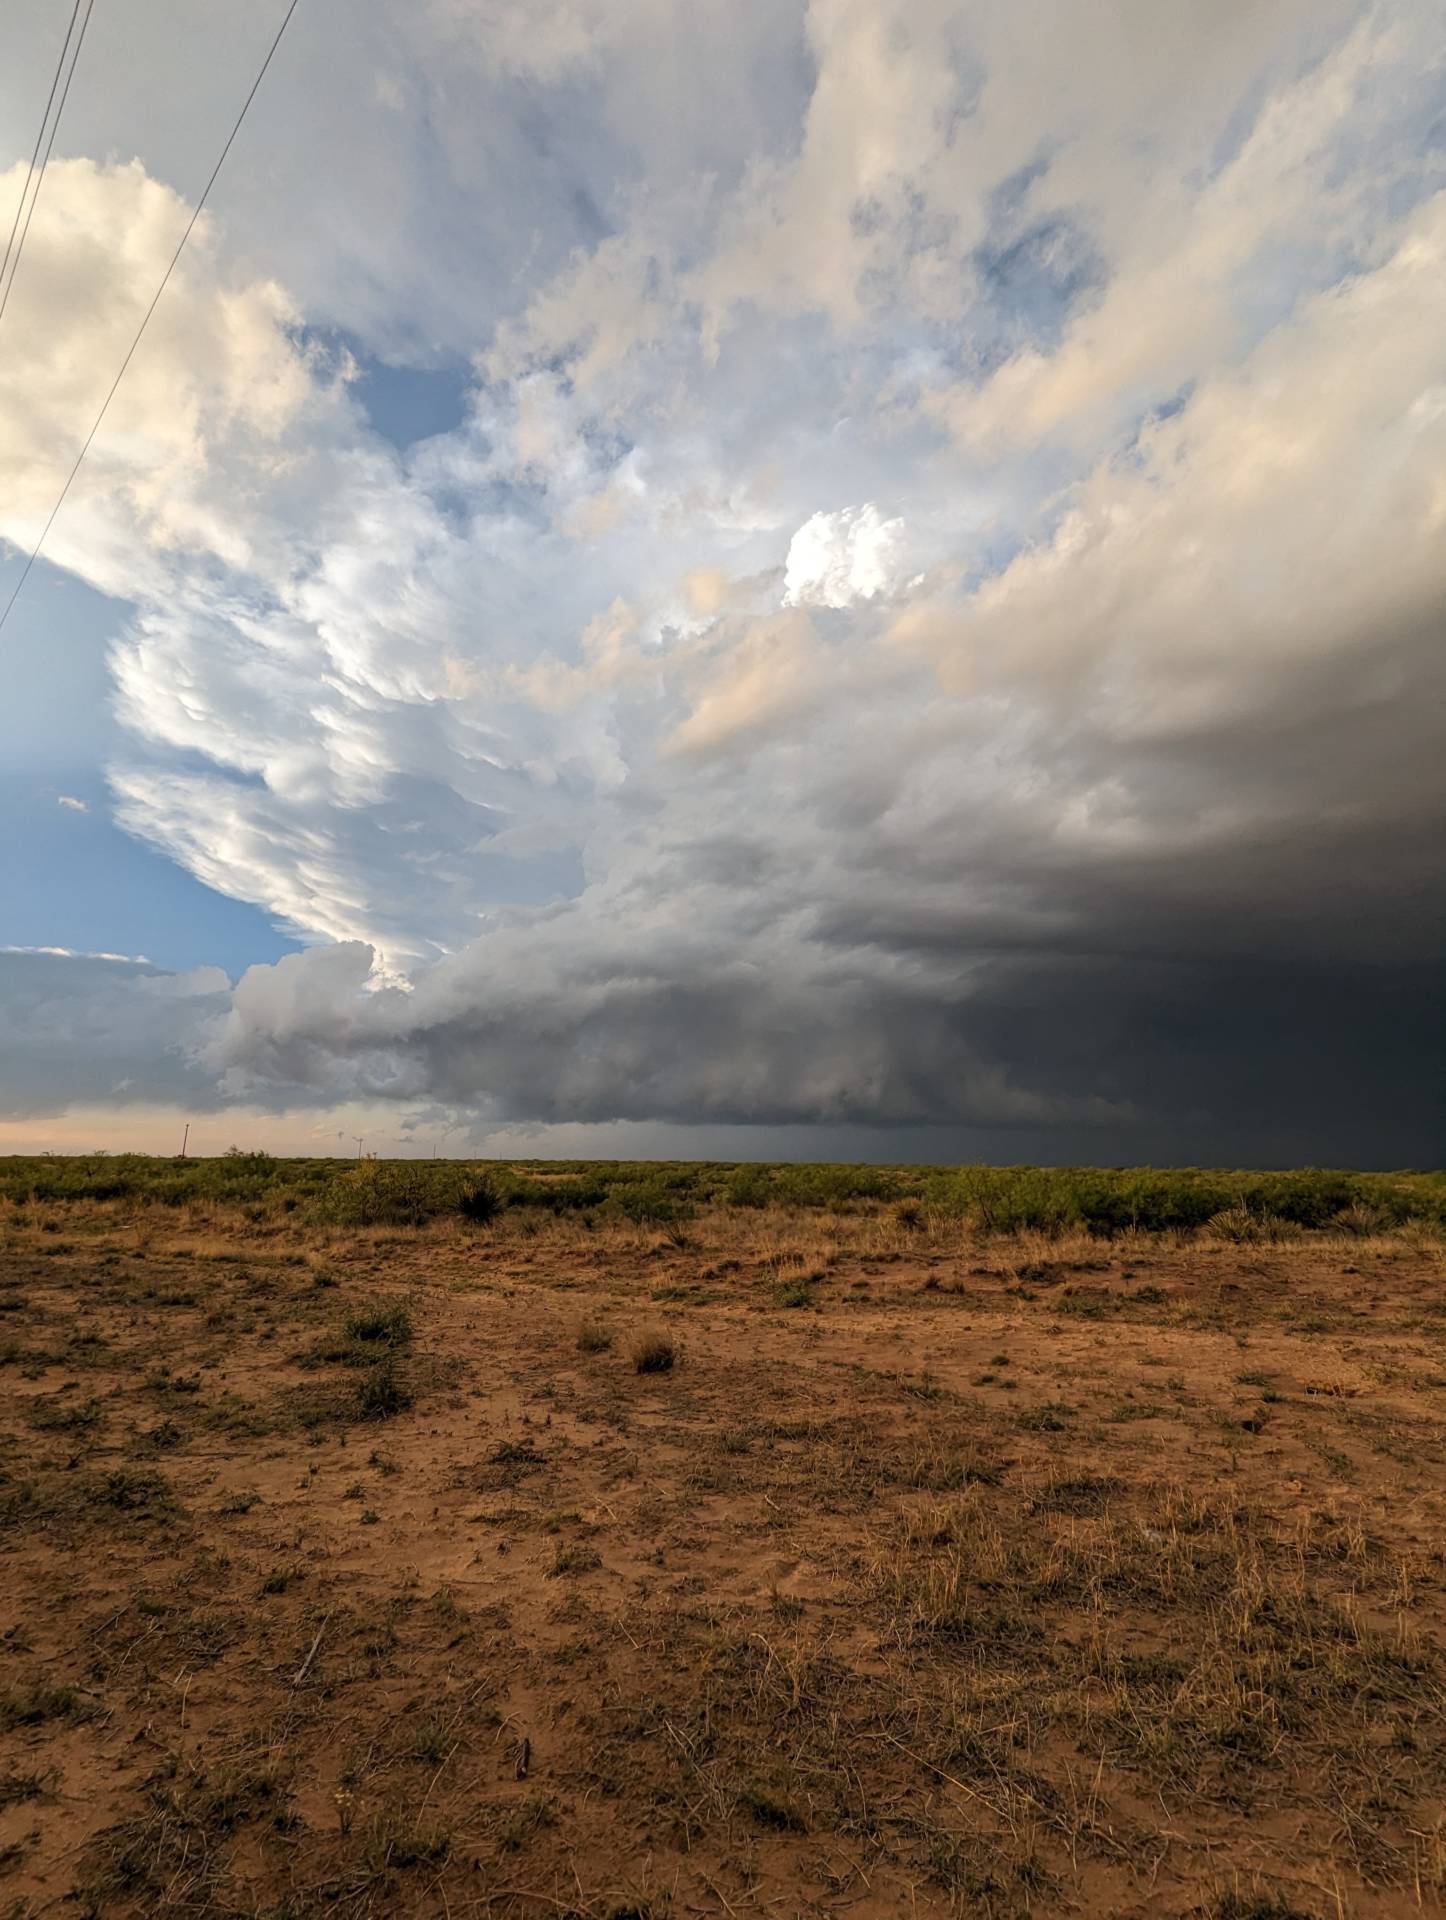 Decaying storm at sunset near Fort Sumner, New Mexico.